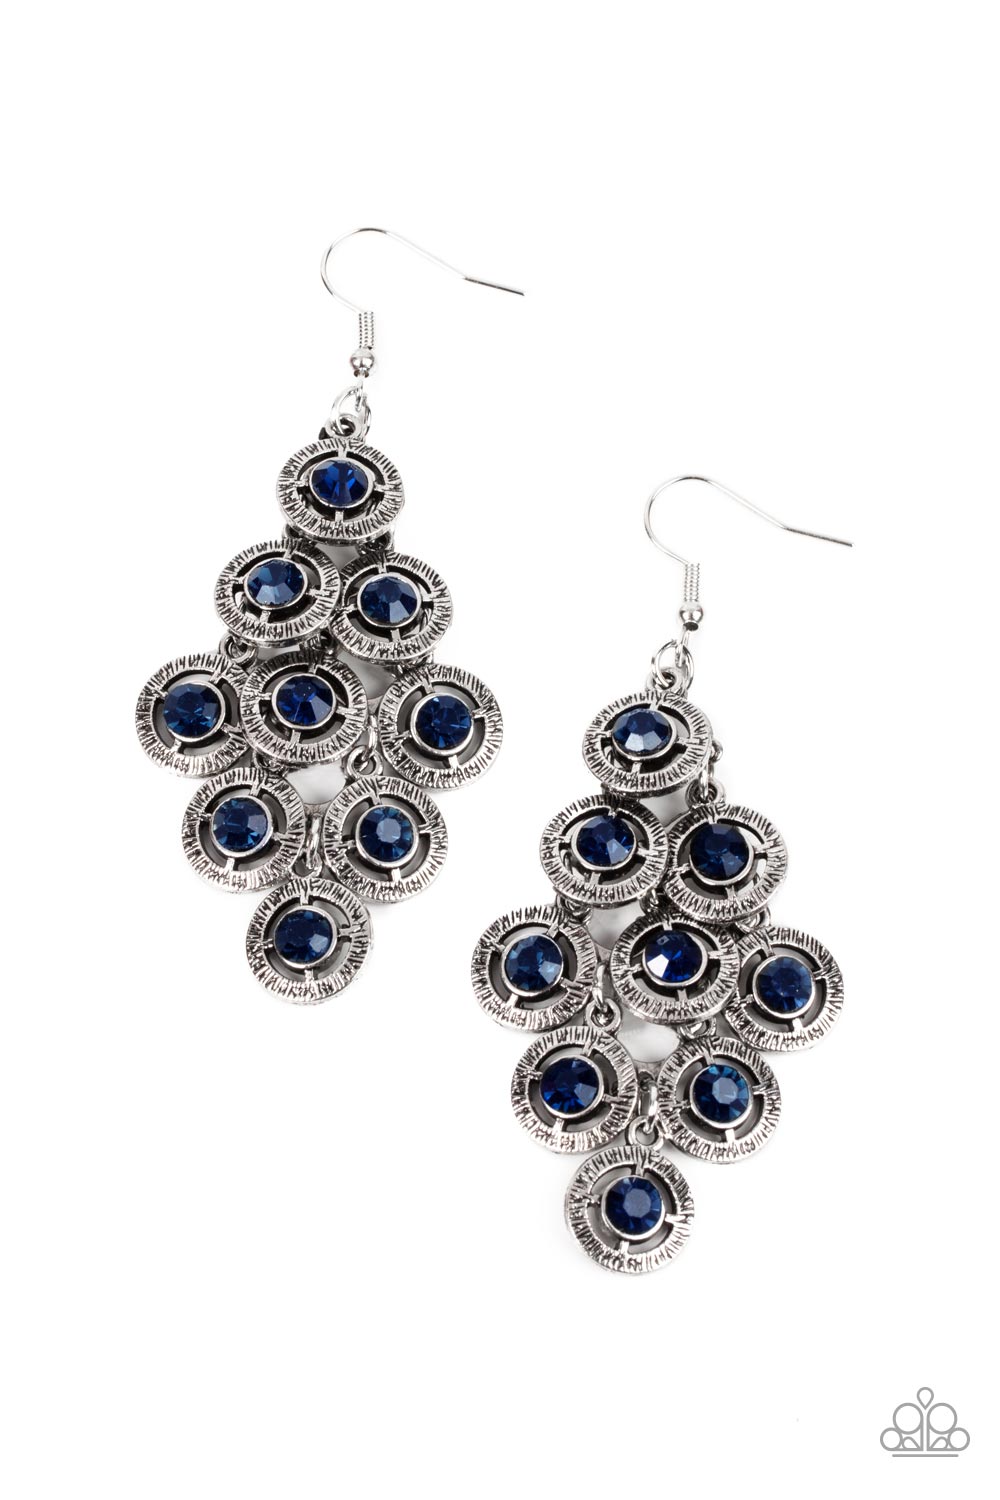 Constellation Cruise Blue Earrings - Paparazzi Accessories- lightbox - CarasShop.com - $5 Jewelry by Cara Jewels